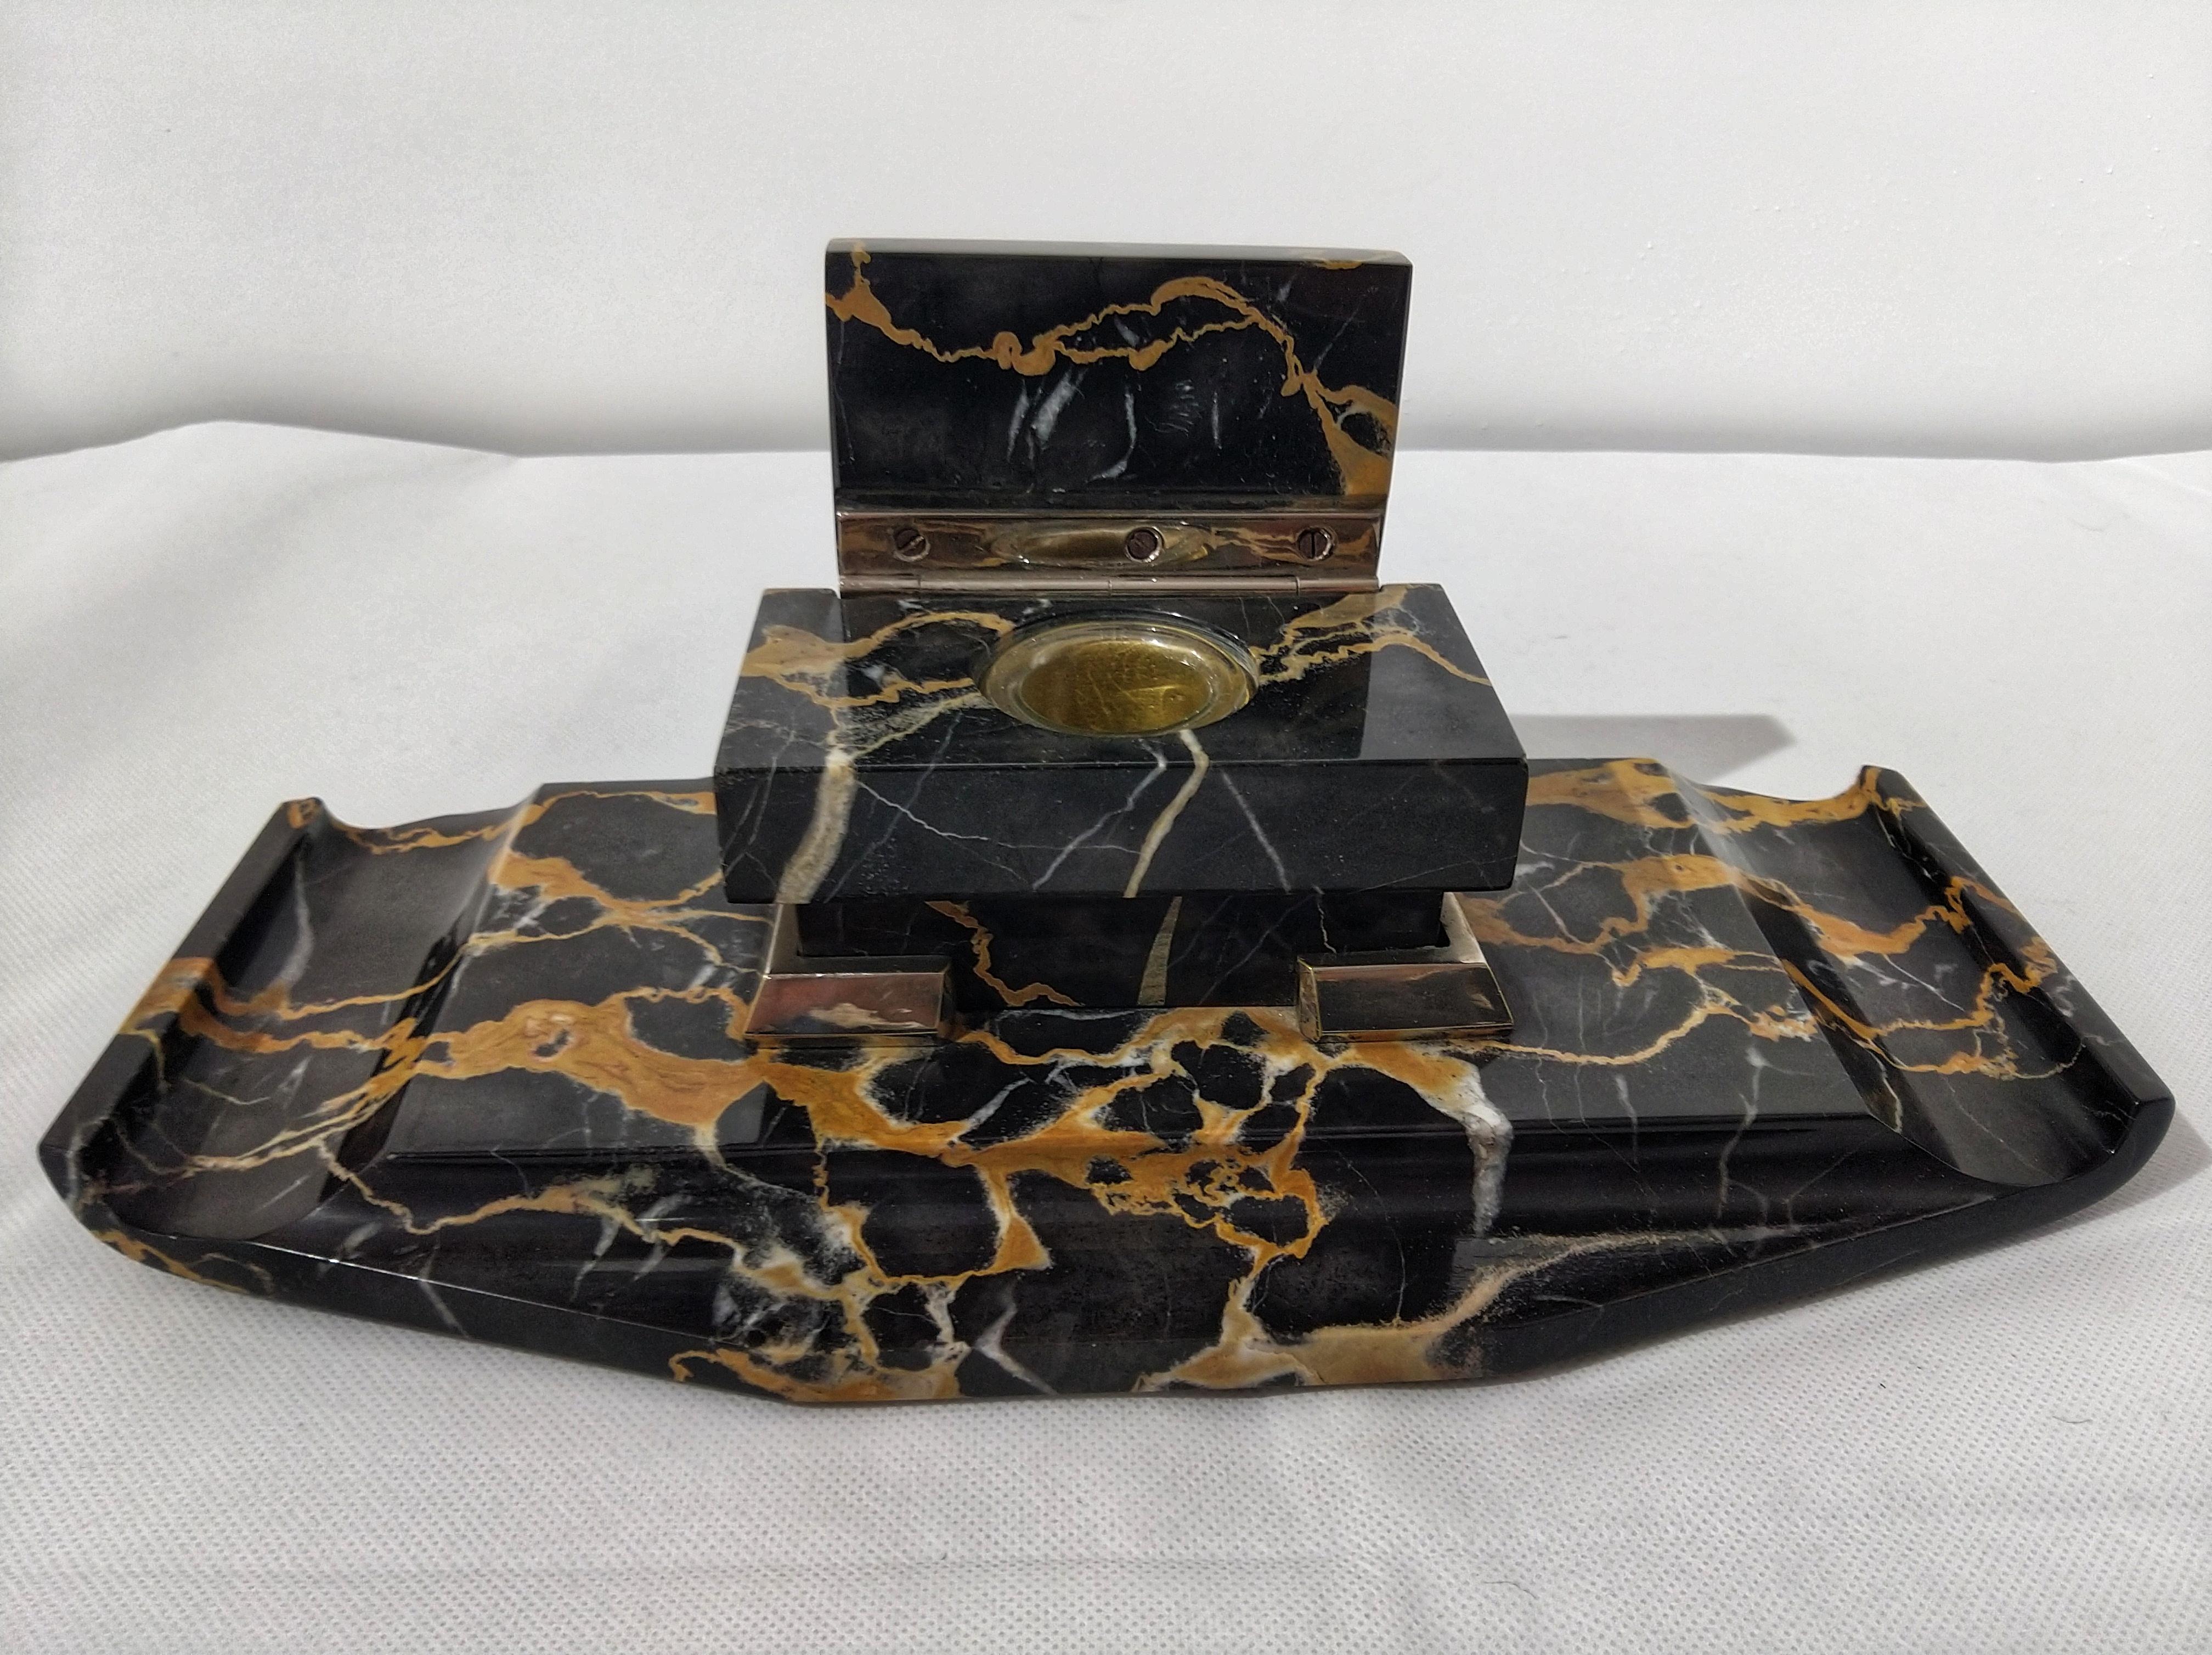 Elegant Art Deco Italian inkwell with black and gold portoro marble.

The marble Nero Portoro (black and gold marble) is a natural black stone with unique intense golden veins. This rock is very elegant and refined, one of the most luxurious